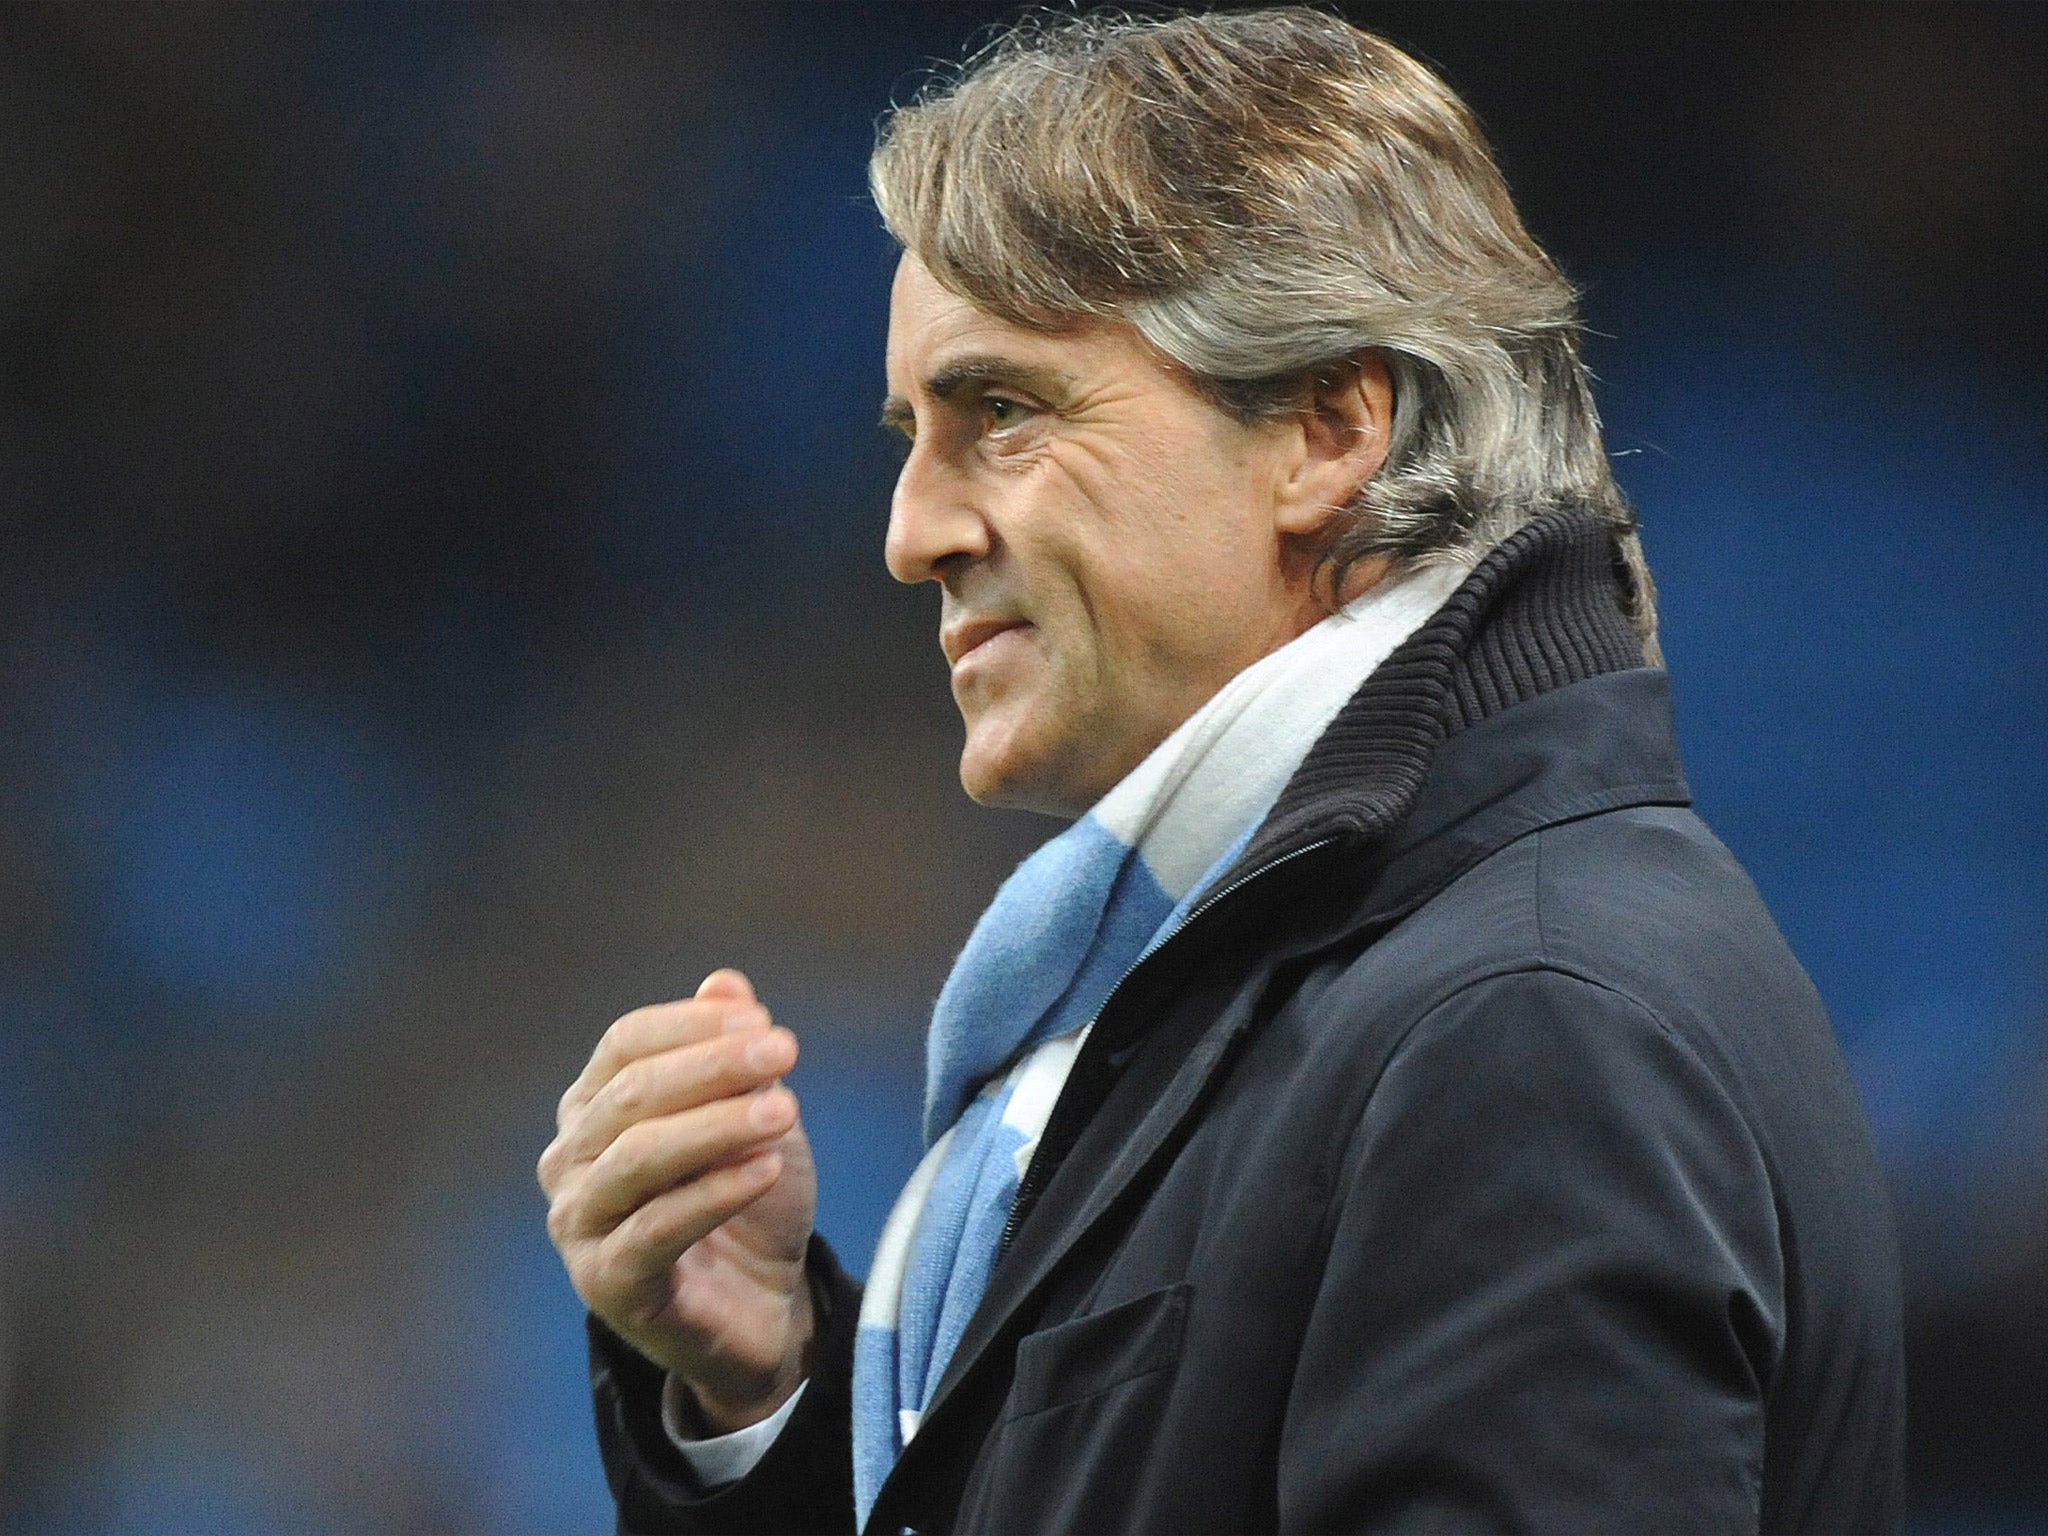 Roberto Mancini managed to inspire a fightback from his side